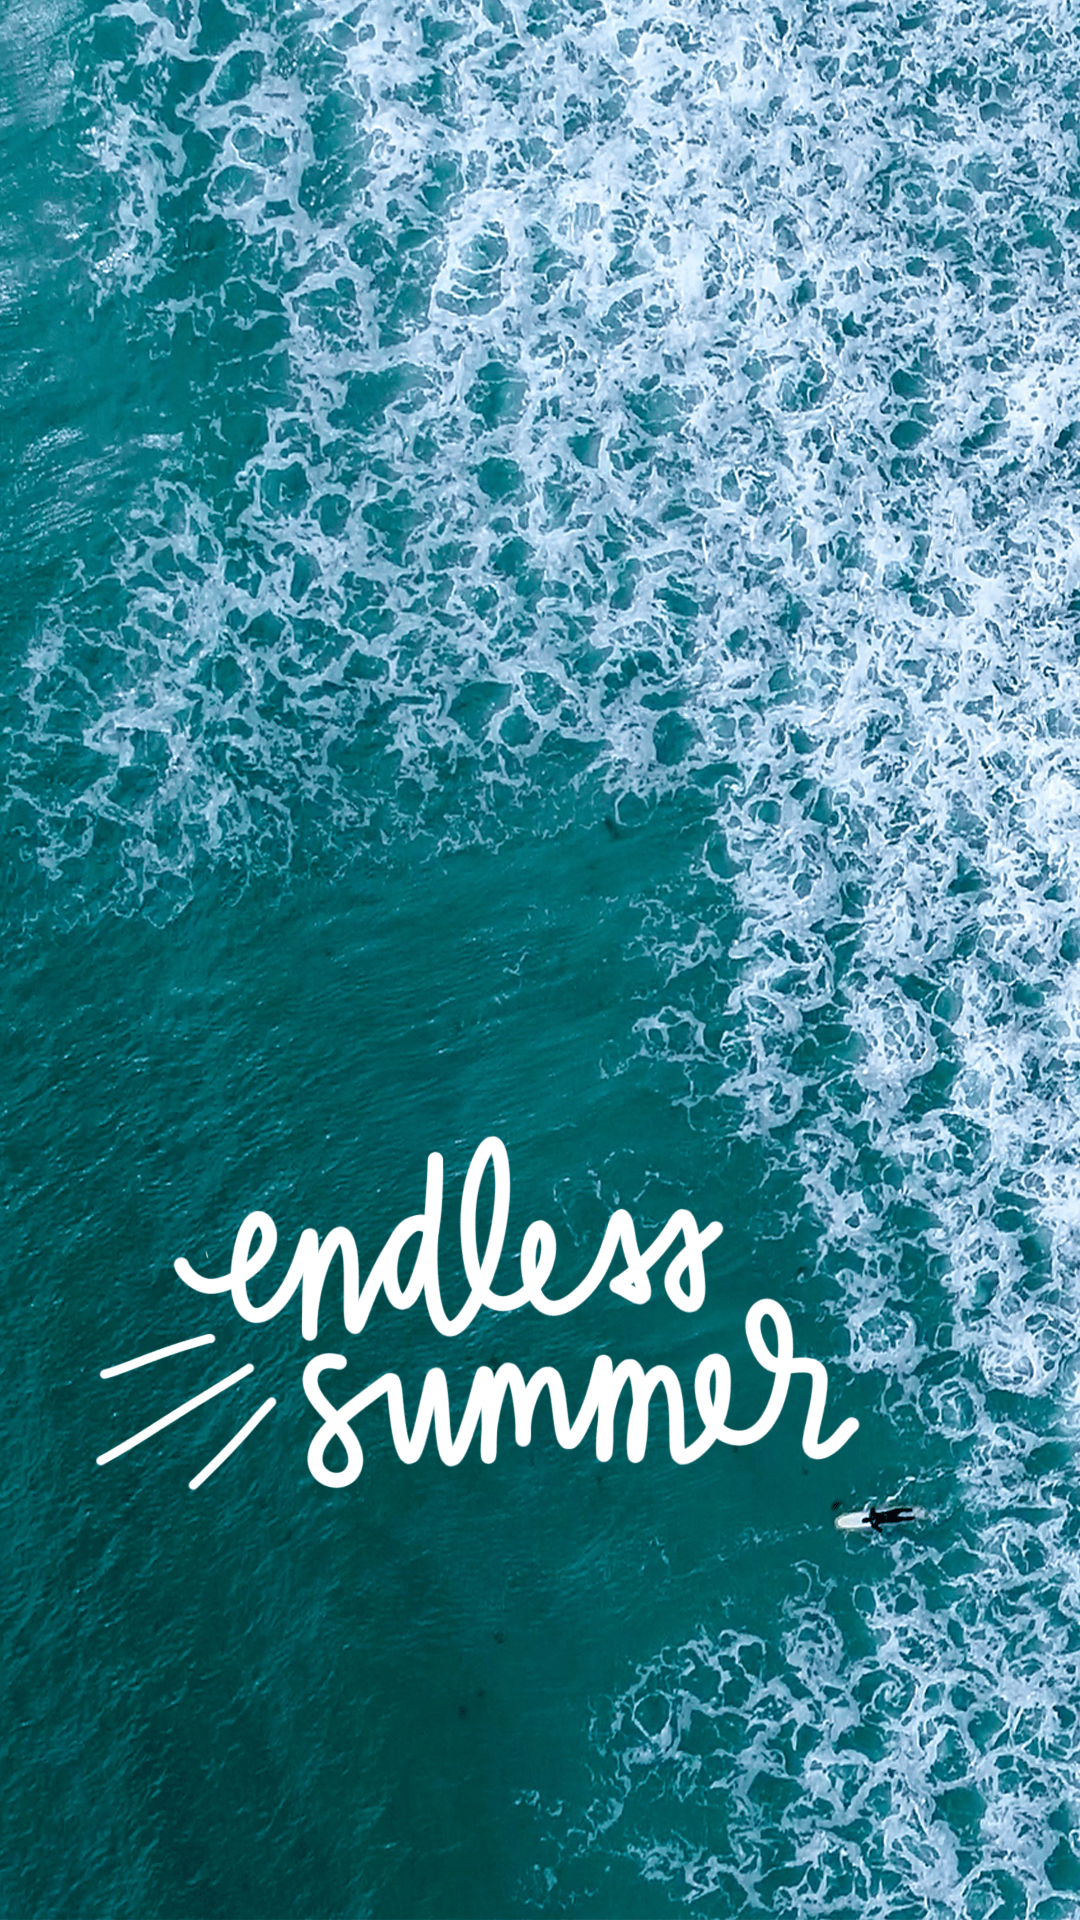 Ready to Decorate your Desktop for August? Check out these free wallpaper and folder icons featuring summer inspirati. Wallpaper, Summer inspiration, Folder icon